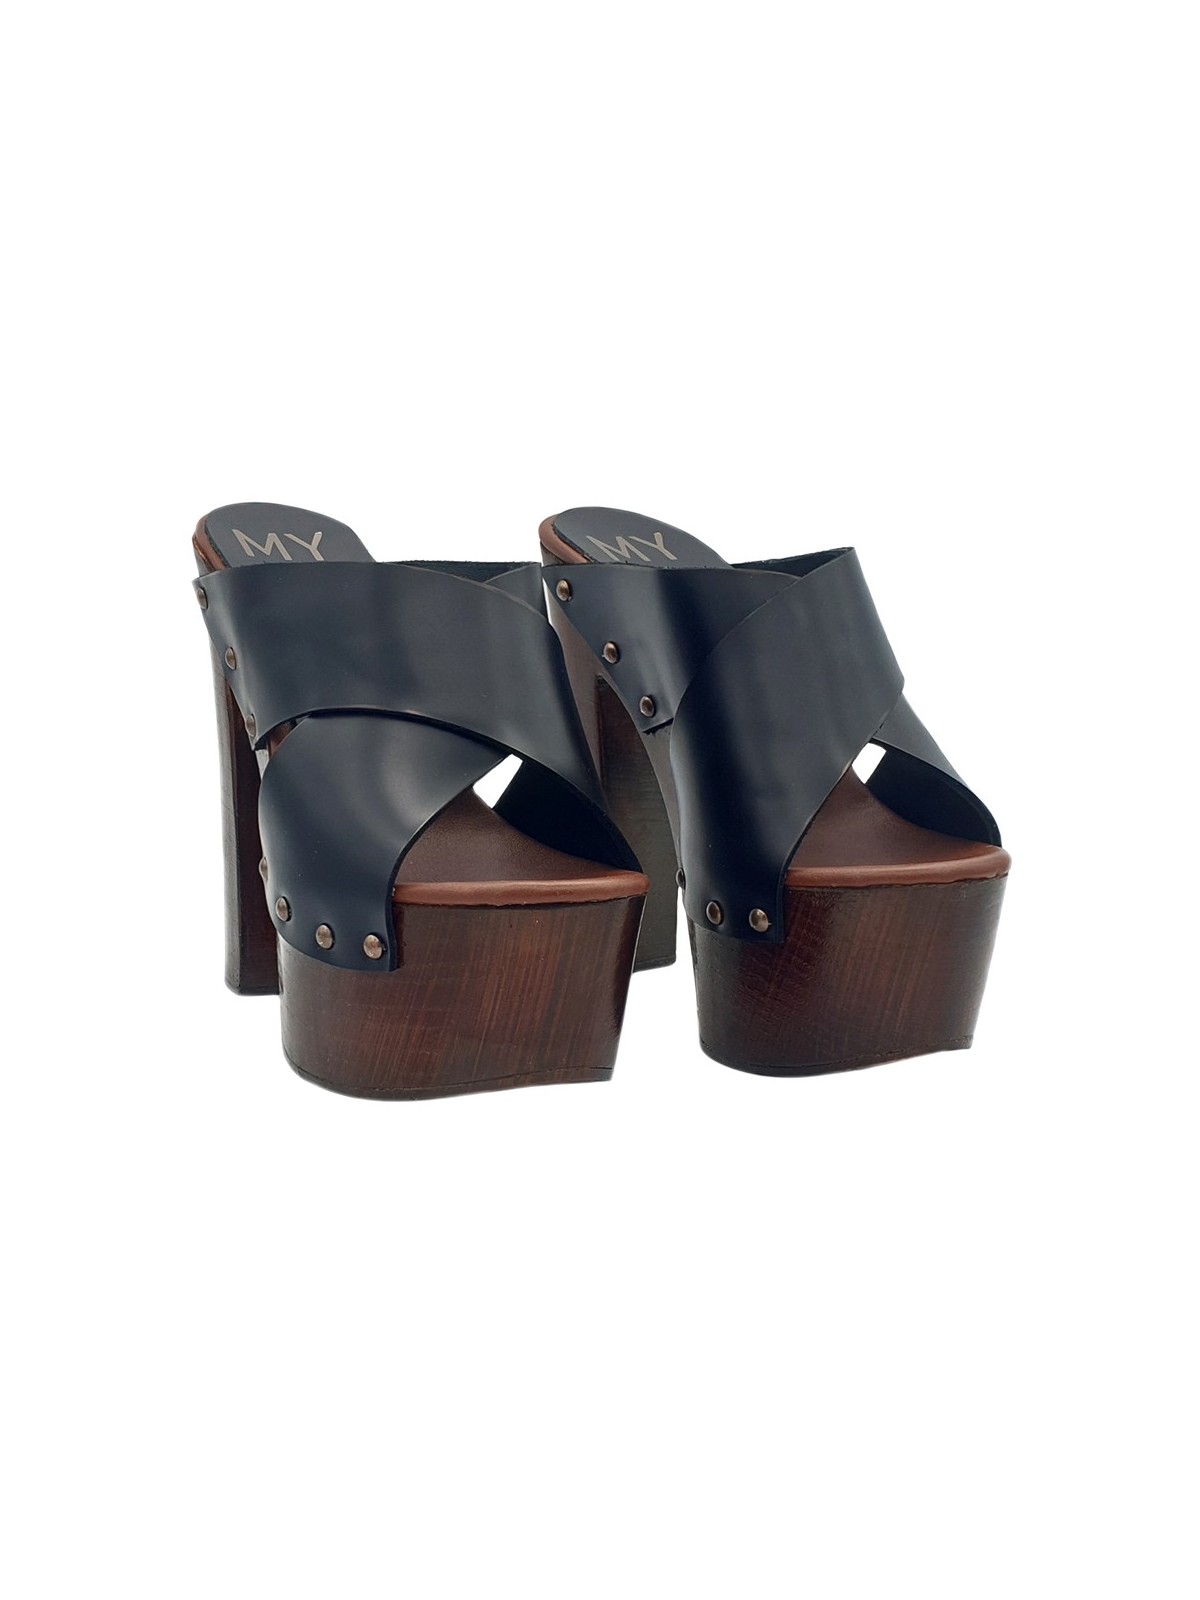 BLACK CLOGS IN LEATHER MADE IN ITALY